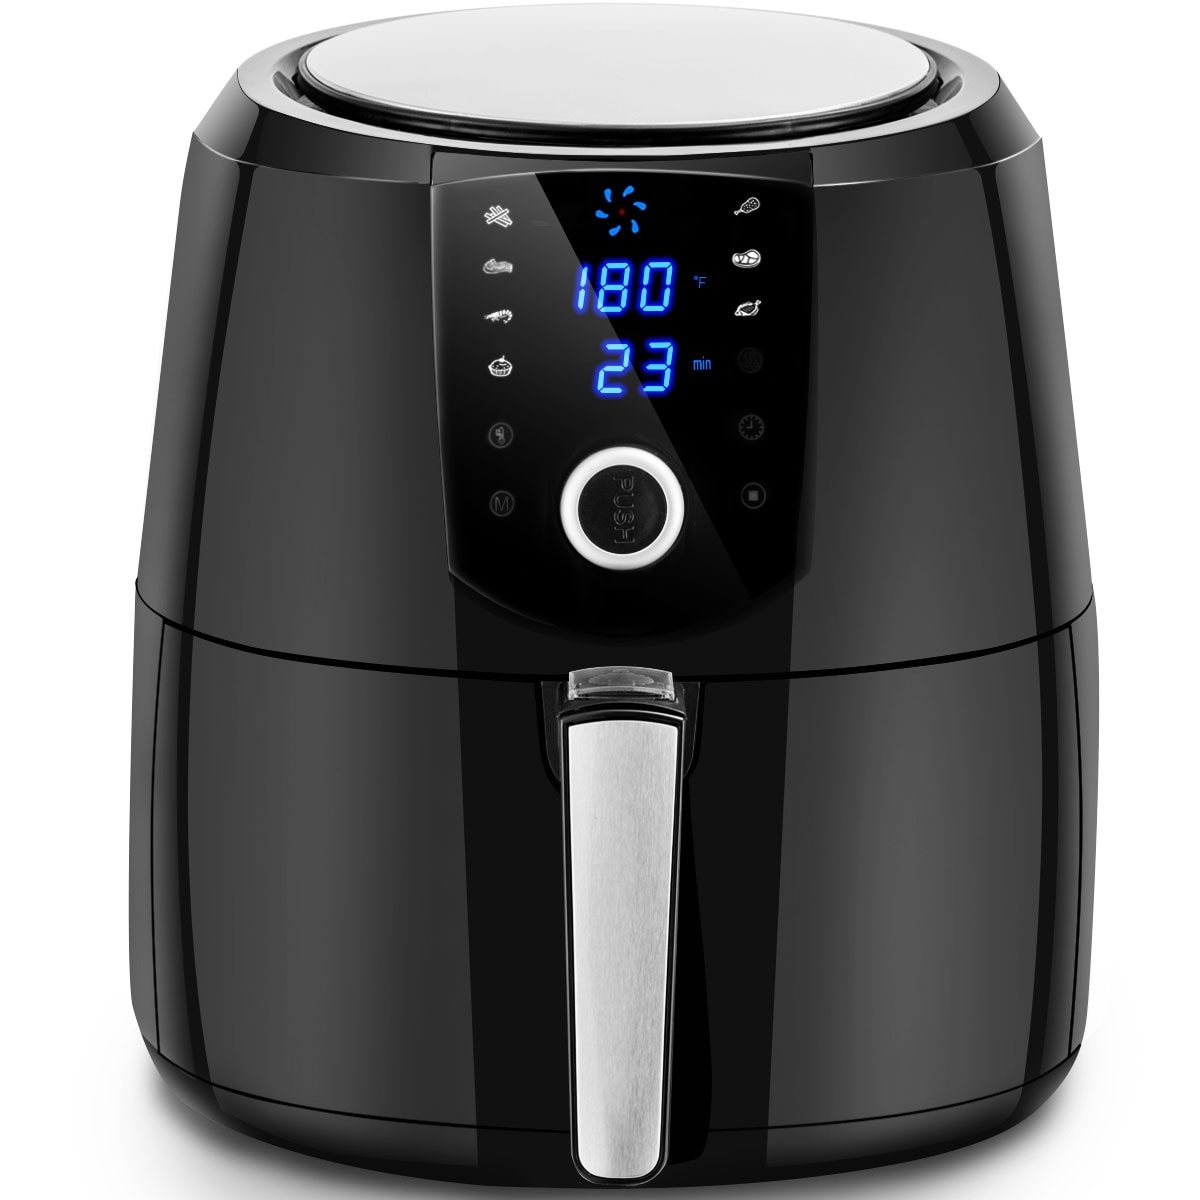 Costway 1400-Watt Electric Air Fryer 3.4 Qt. LCD Touch Screen Timer and  Temperature Control – Monsecta Depot